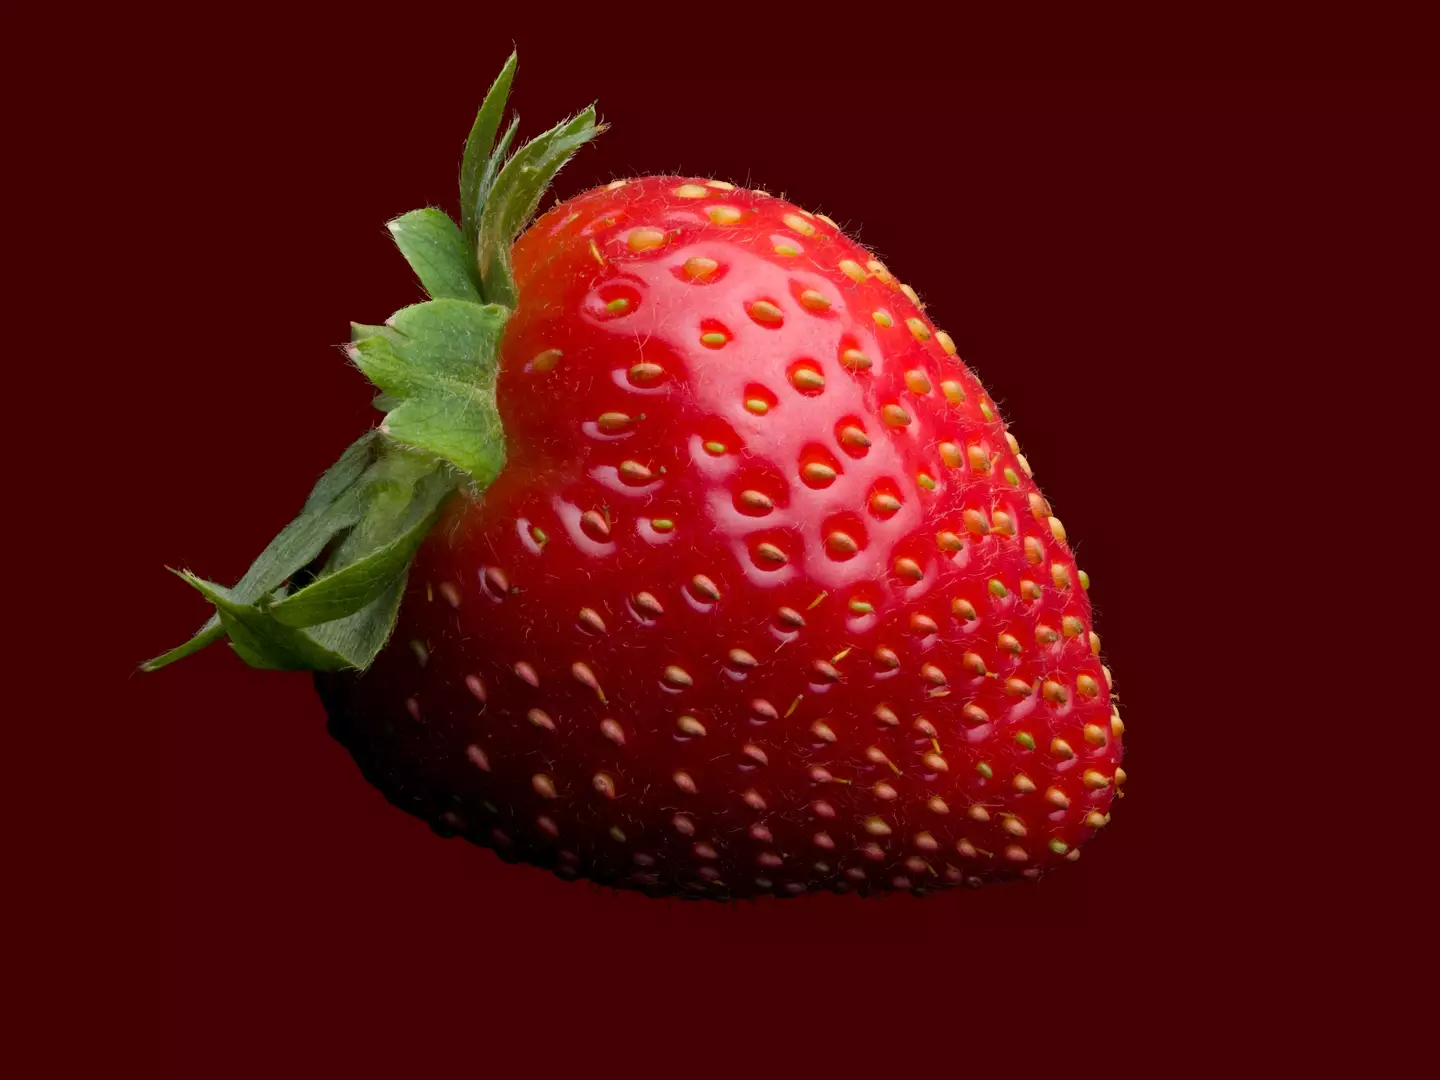 People have been left mind-blown by what the white dots on strawberries are.